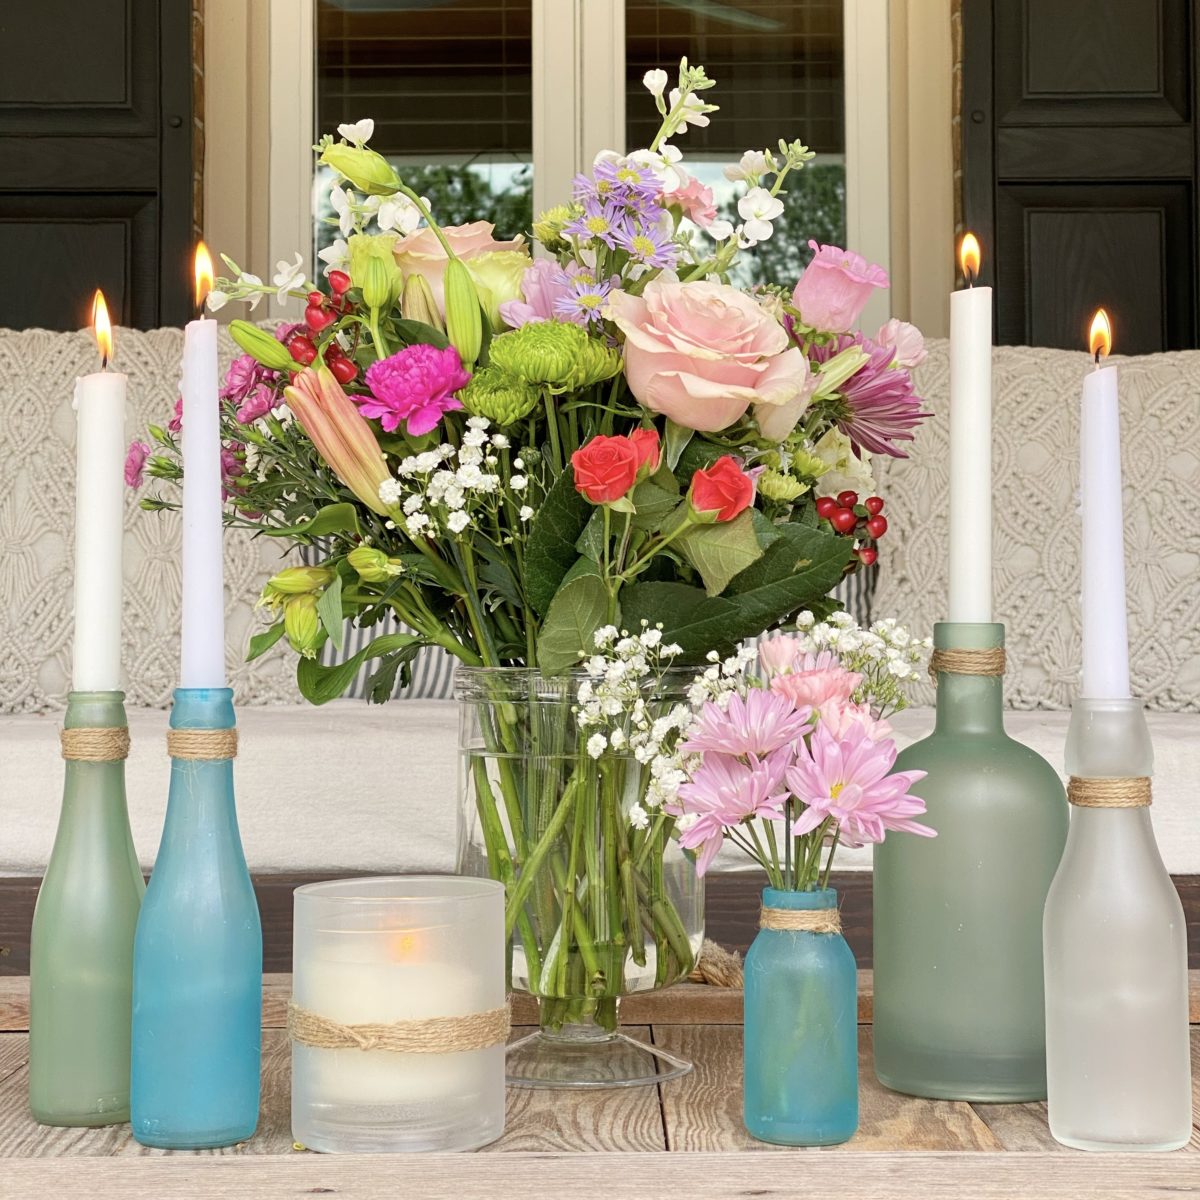 DIY sea glass bottles on the porch styled with flowers and candles.